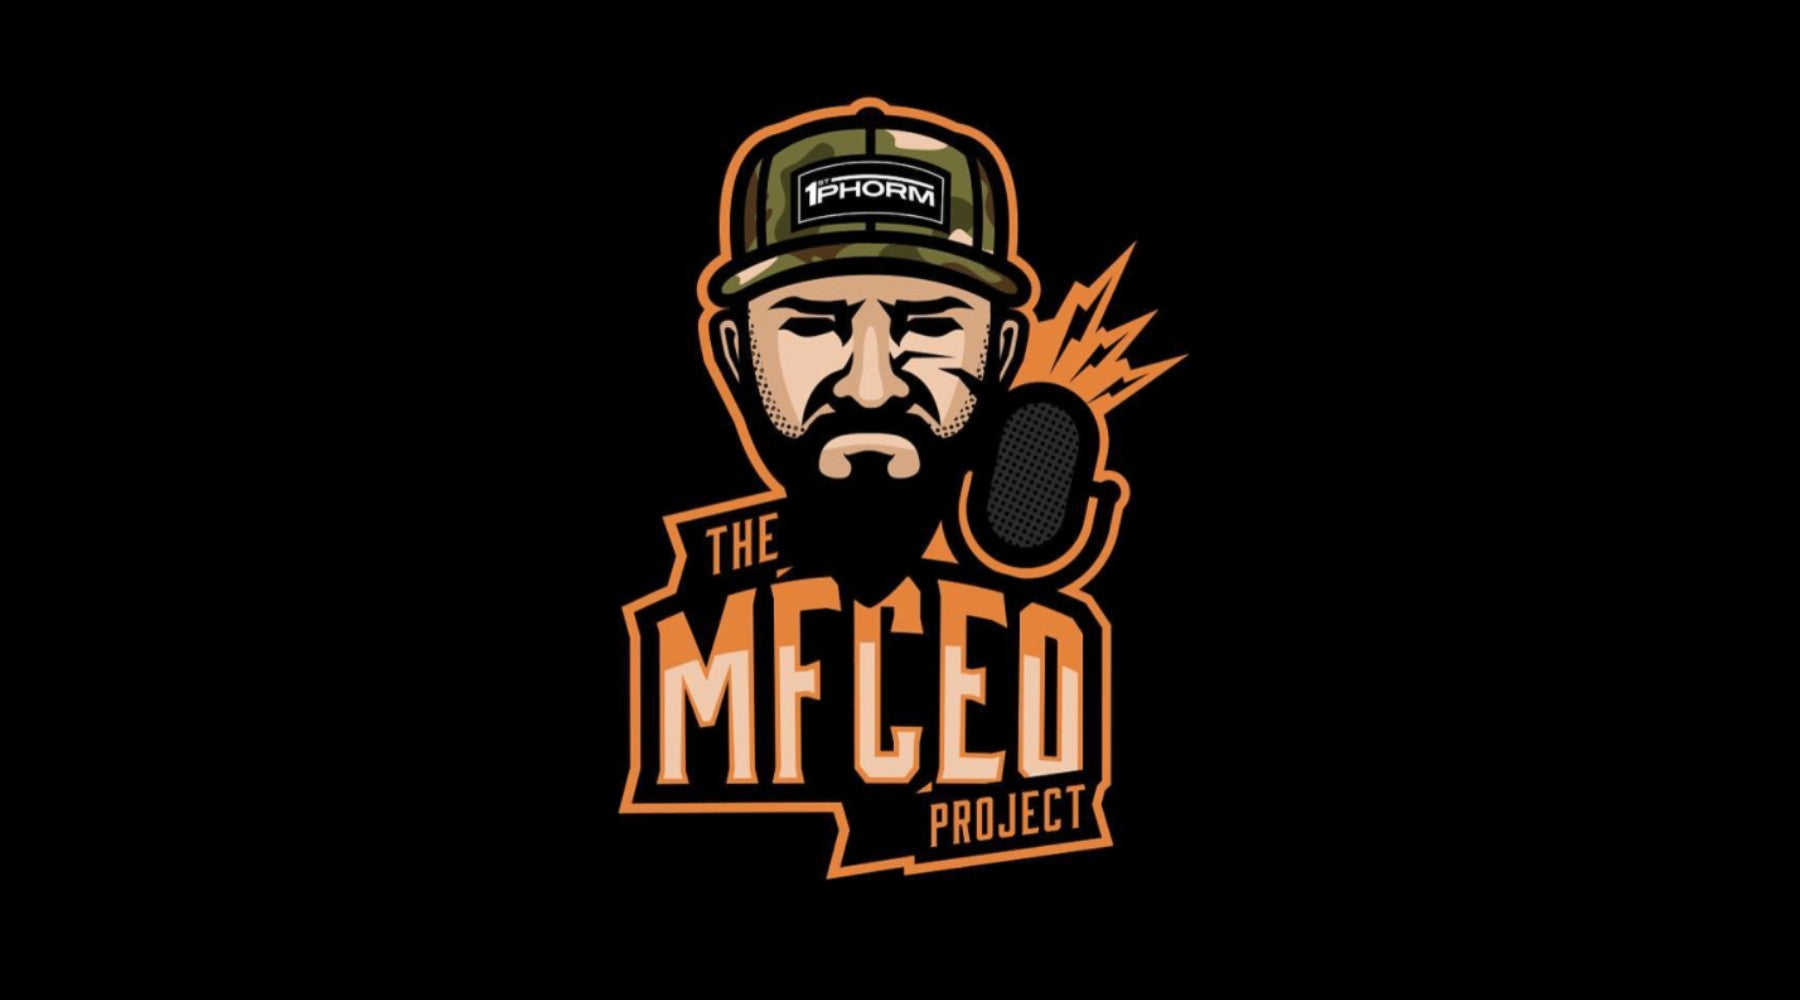 The MFCEO Movement, with Andy Frisella - MFCEO100